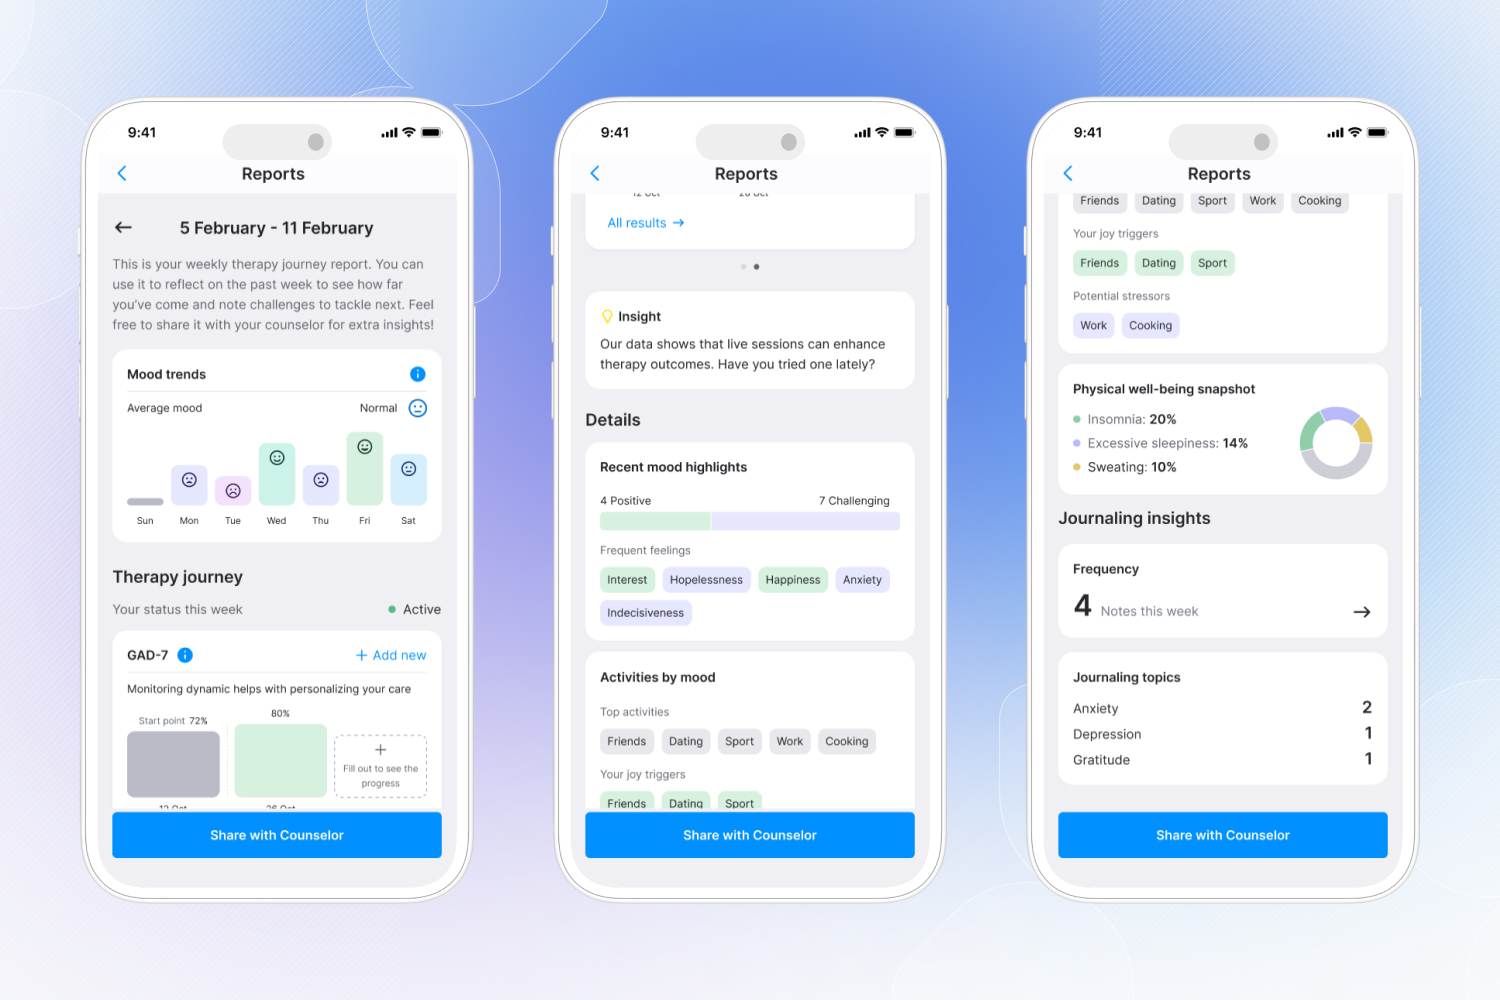 Personalized reports – your progress, visualized. There are screenshots from an app to track your mental health.